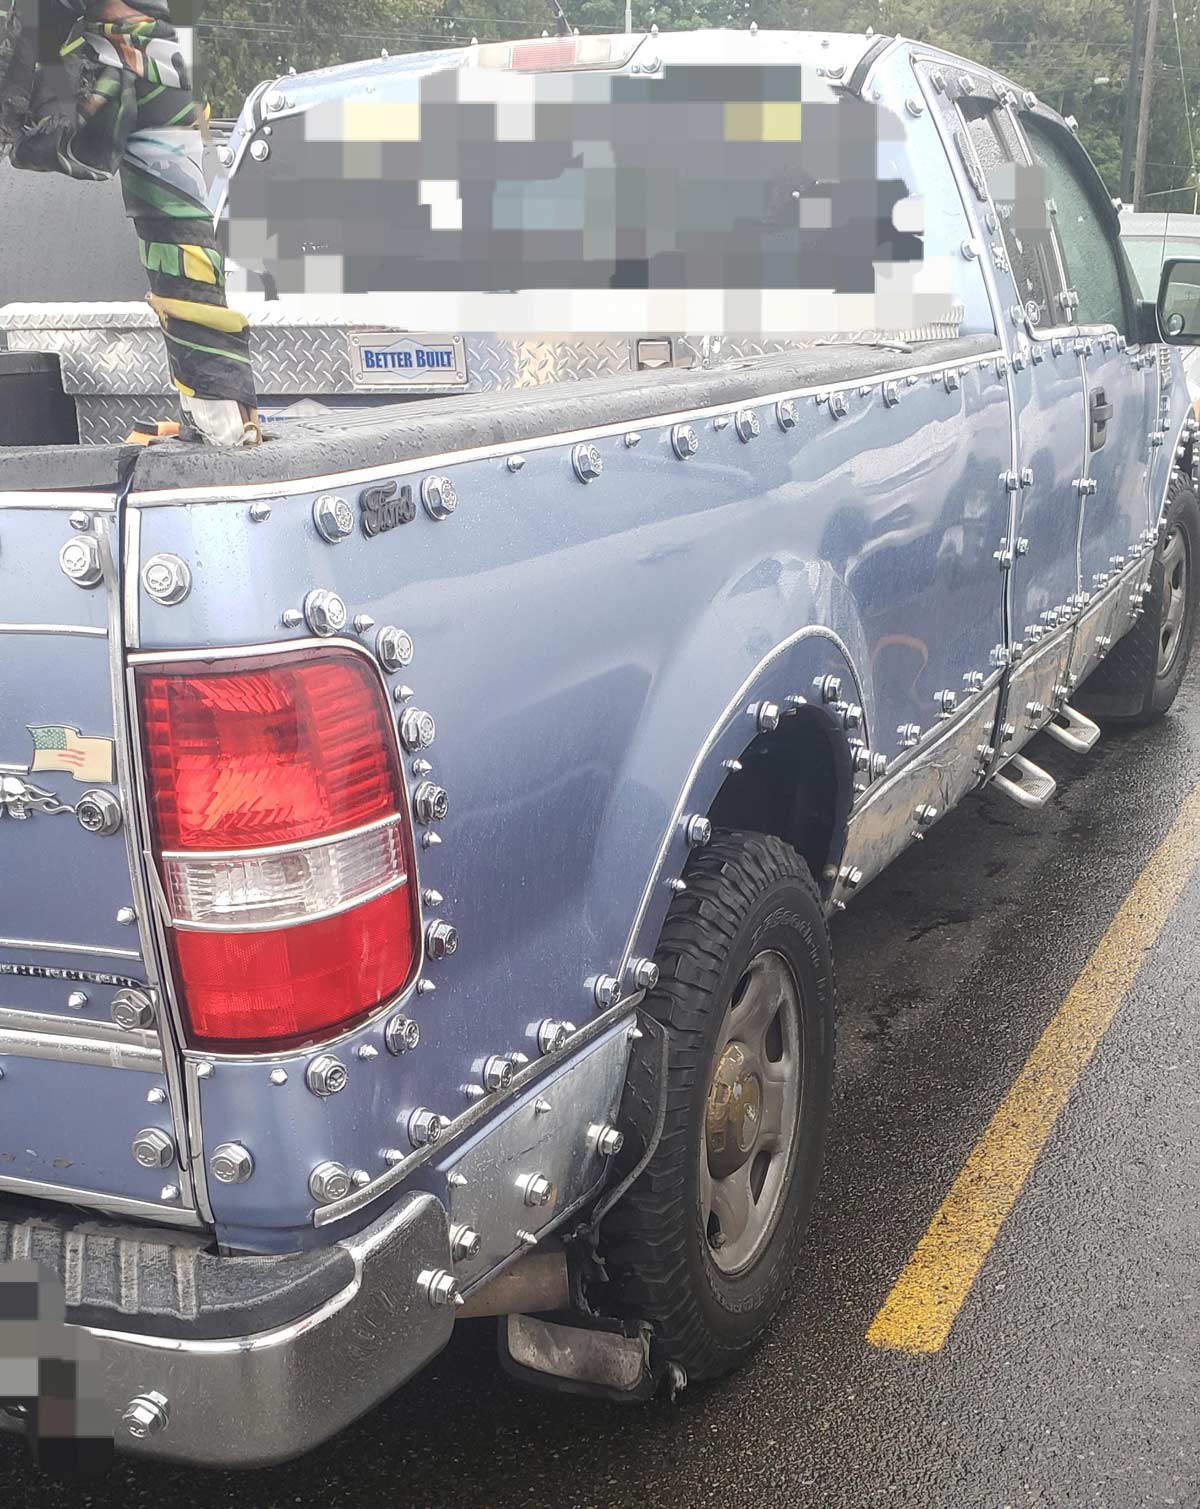 Owner of this truck was ready to bolt at a moments notice